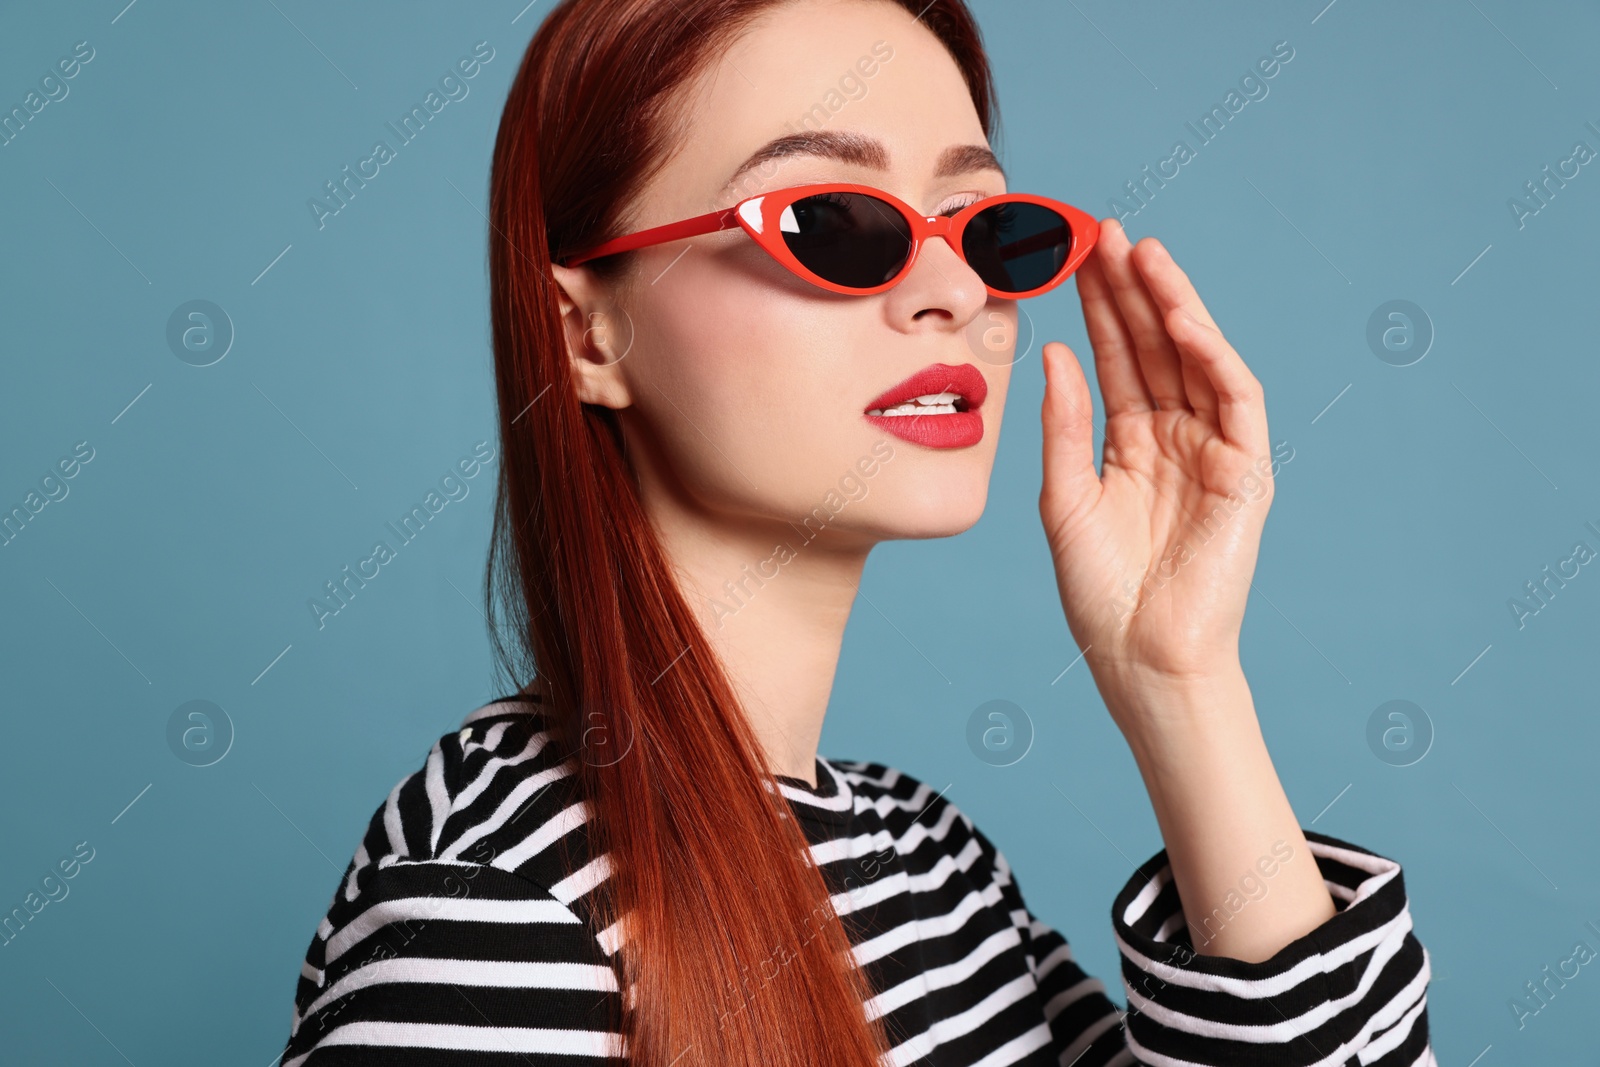 Photo of Stylish woman with red dyed hair and sunglasses on light blue background